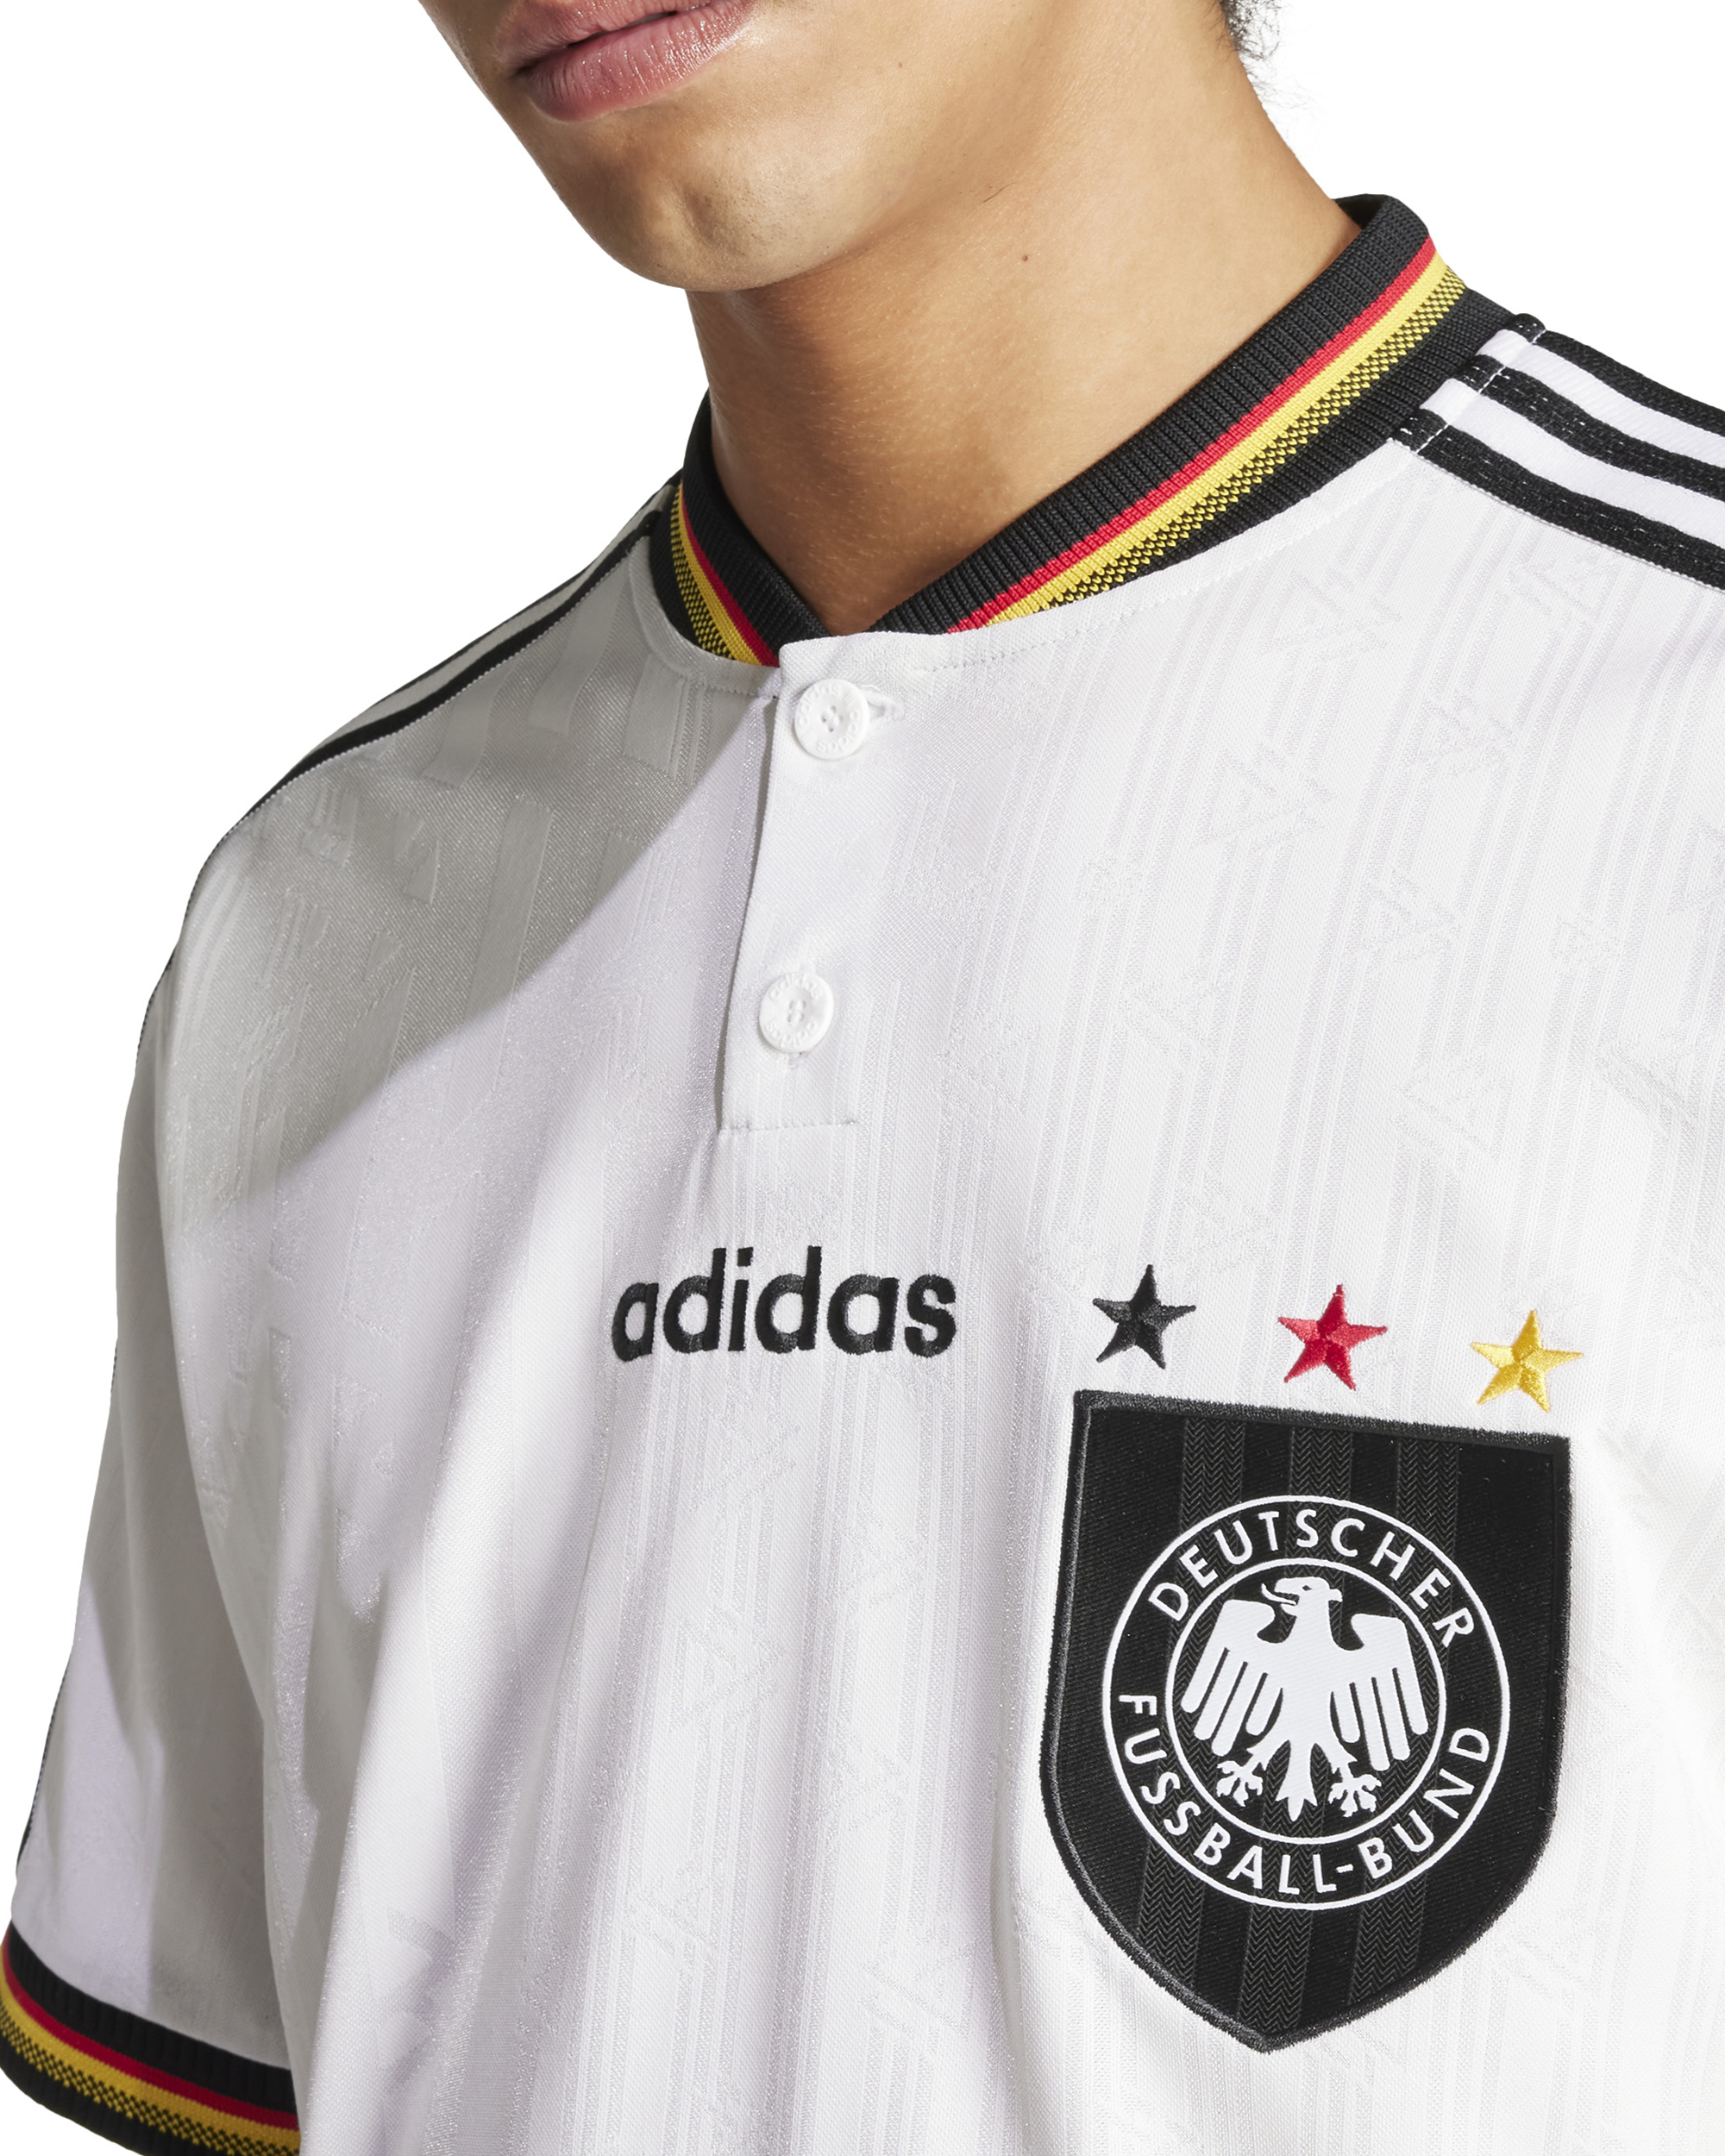 Germany 1996 Home Jersey - White